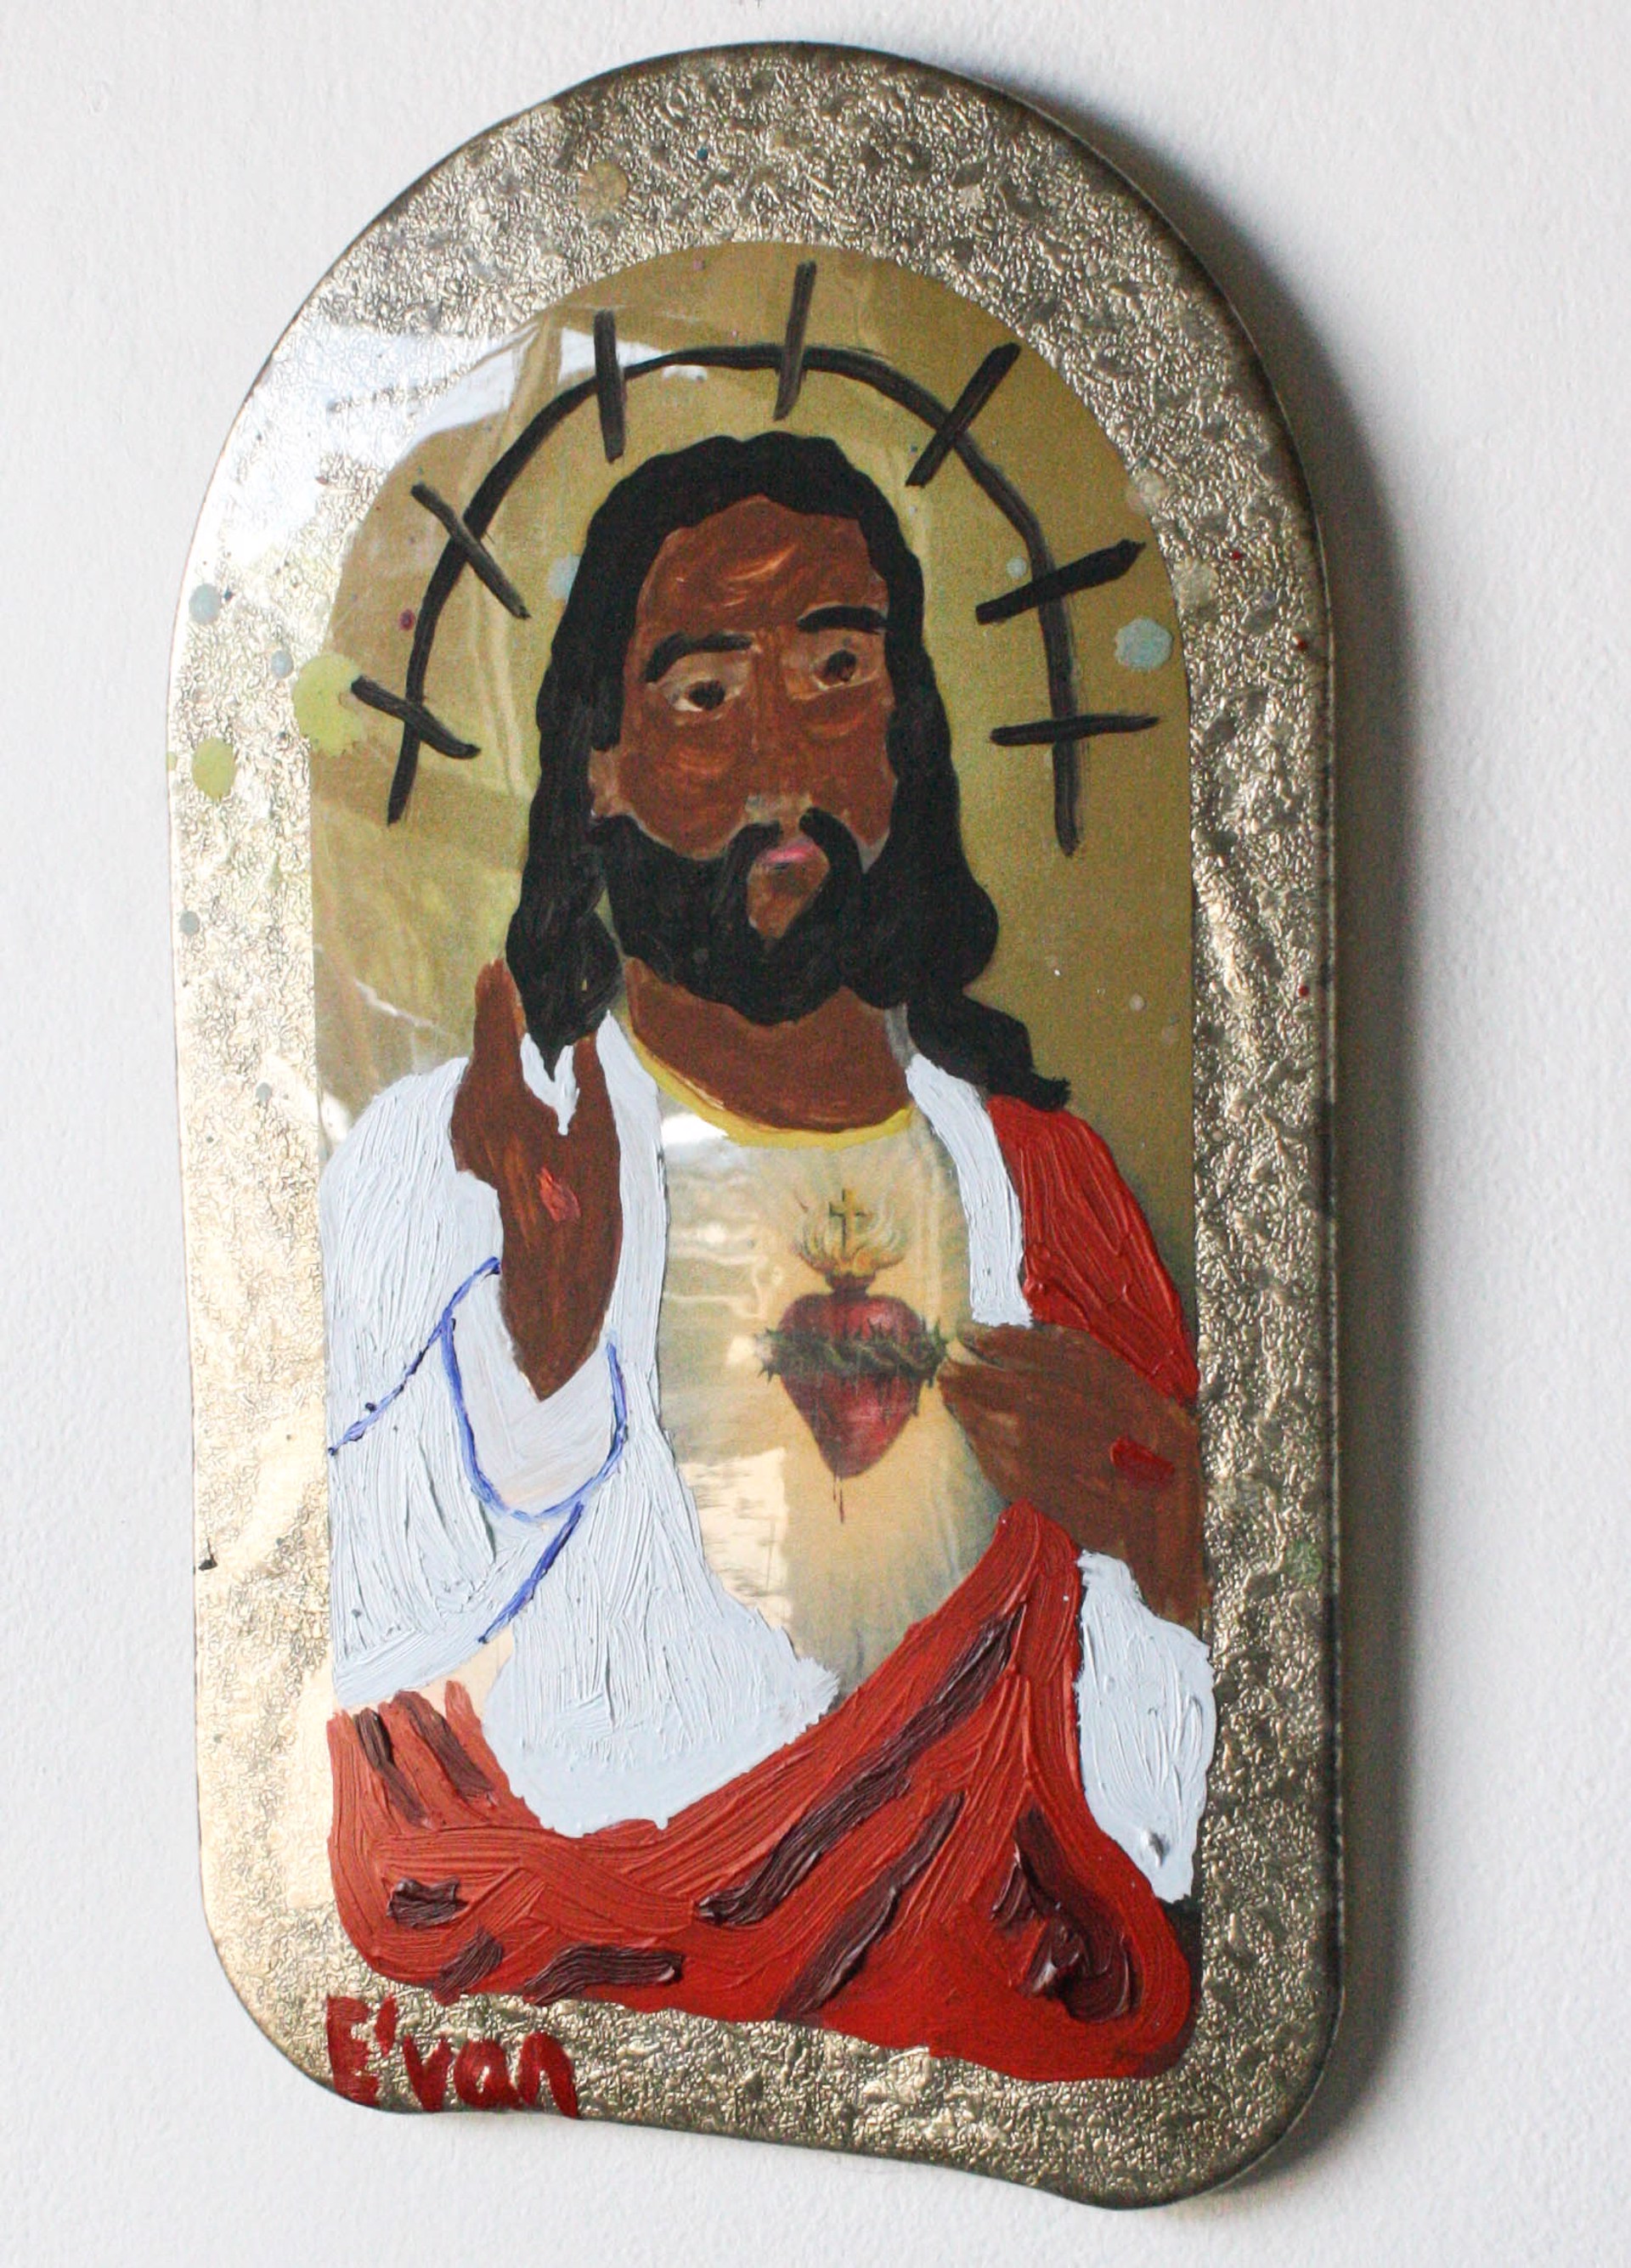 This was a White Jesus But I made him Brown! by Marlos E'van